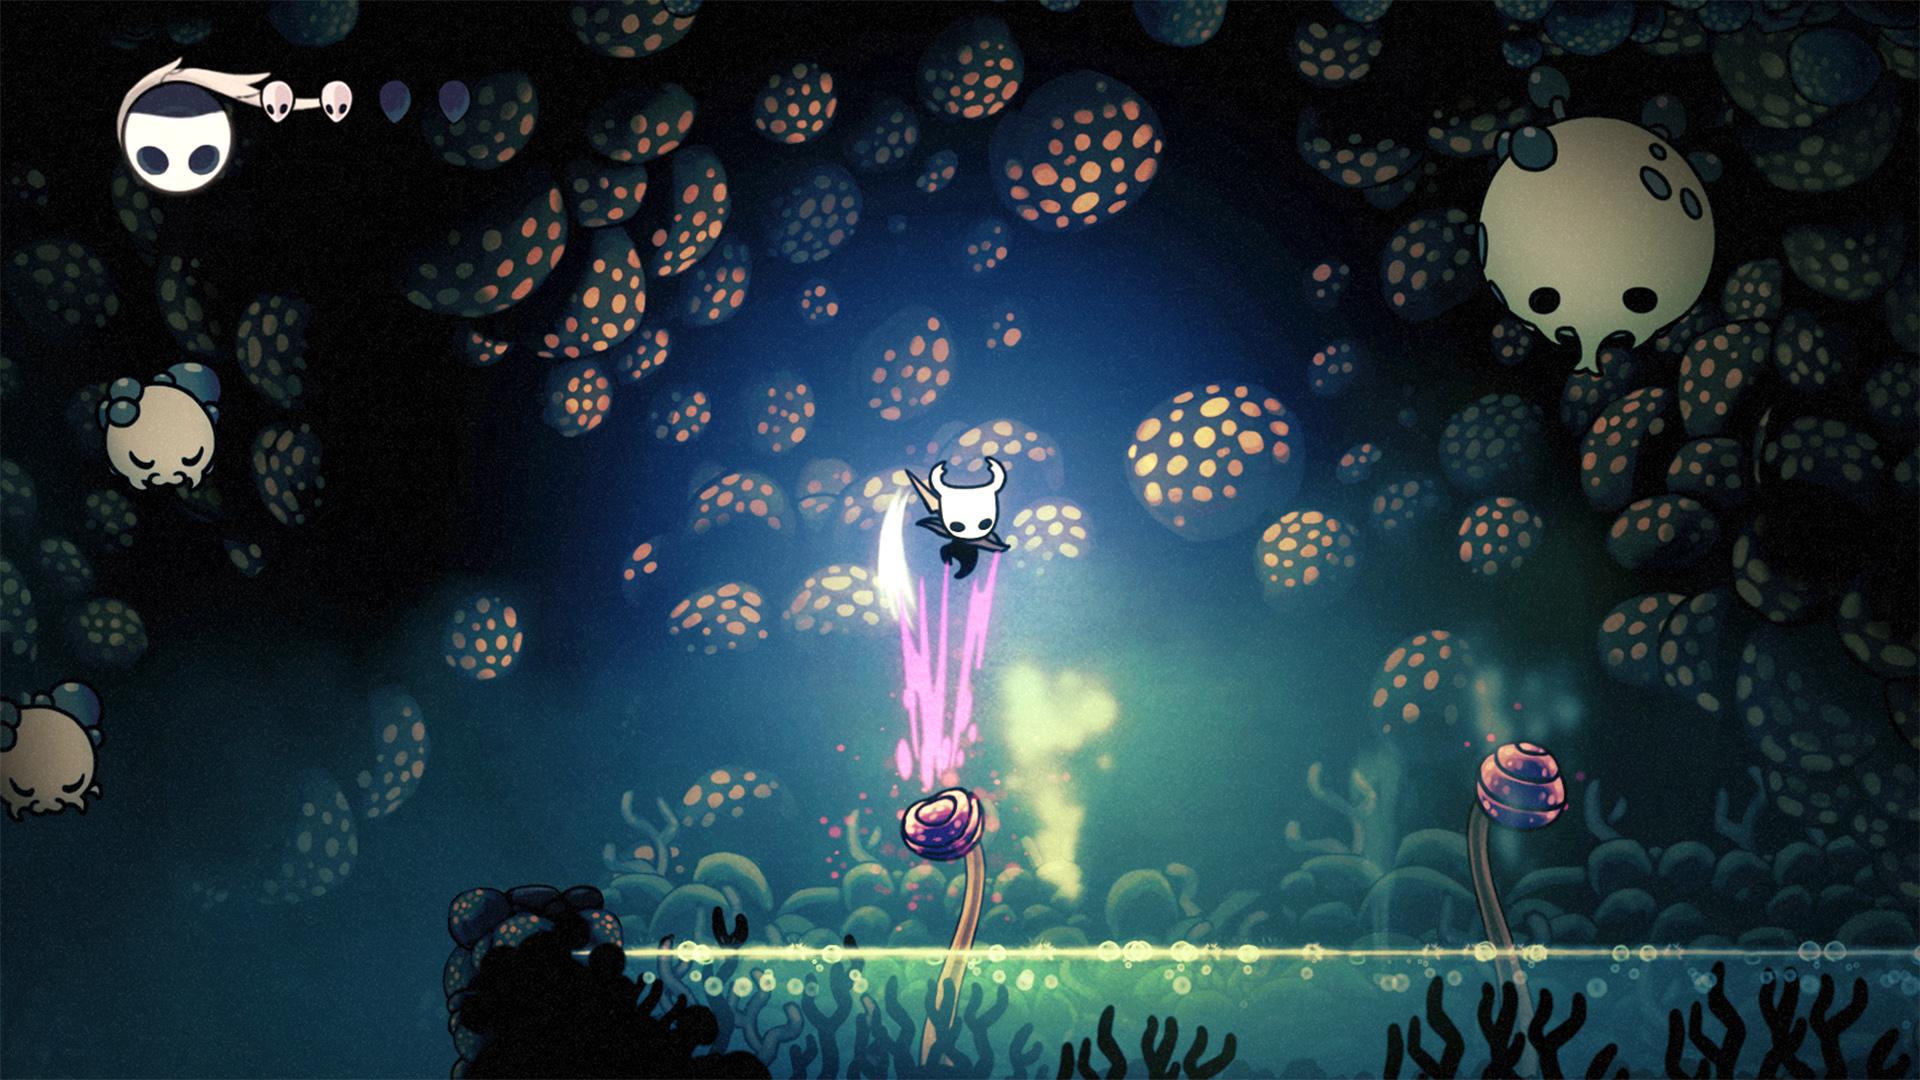 Hollow Knight on Steam